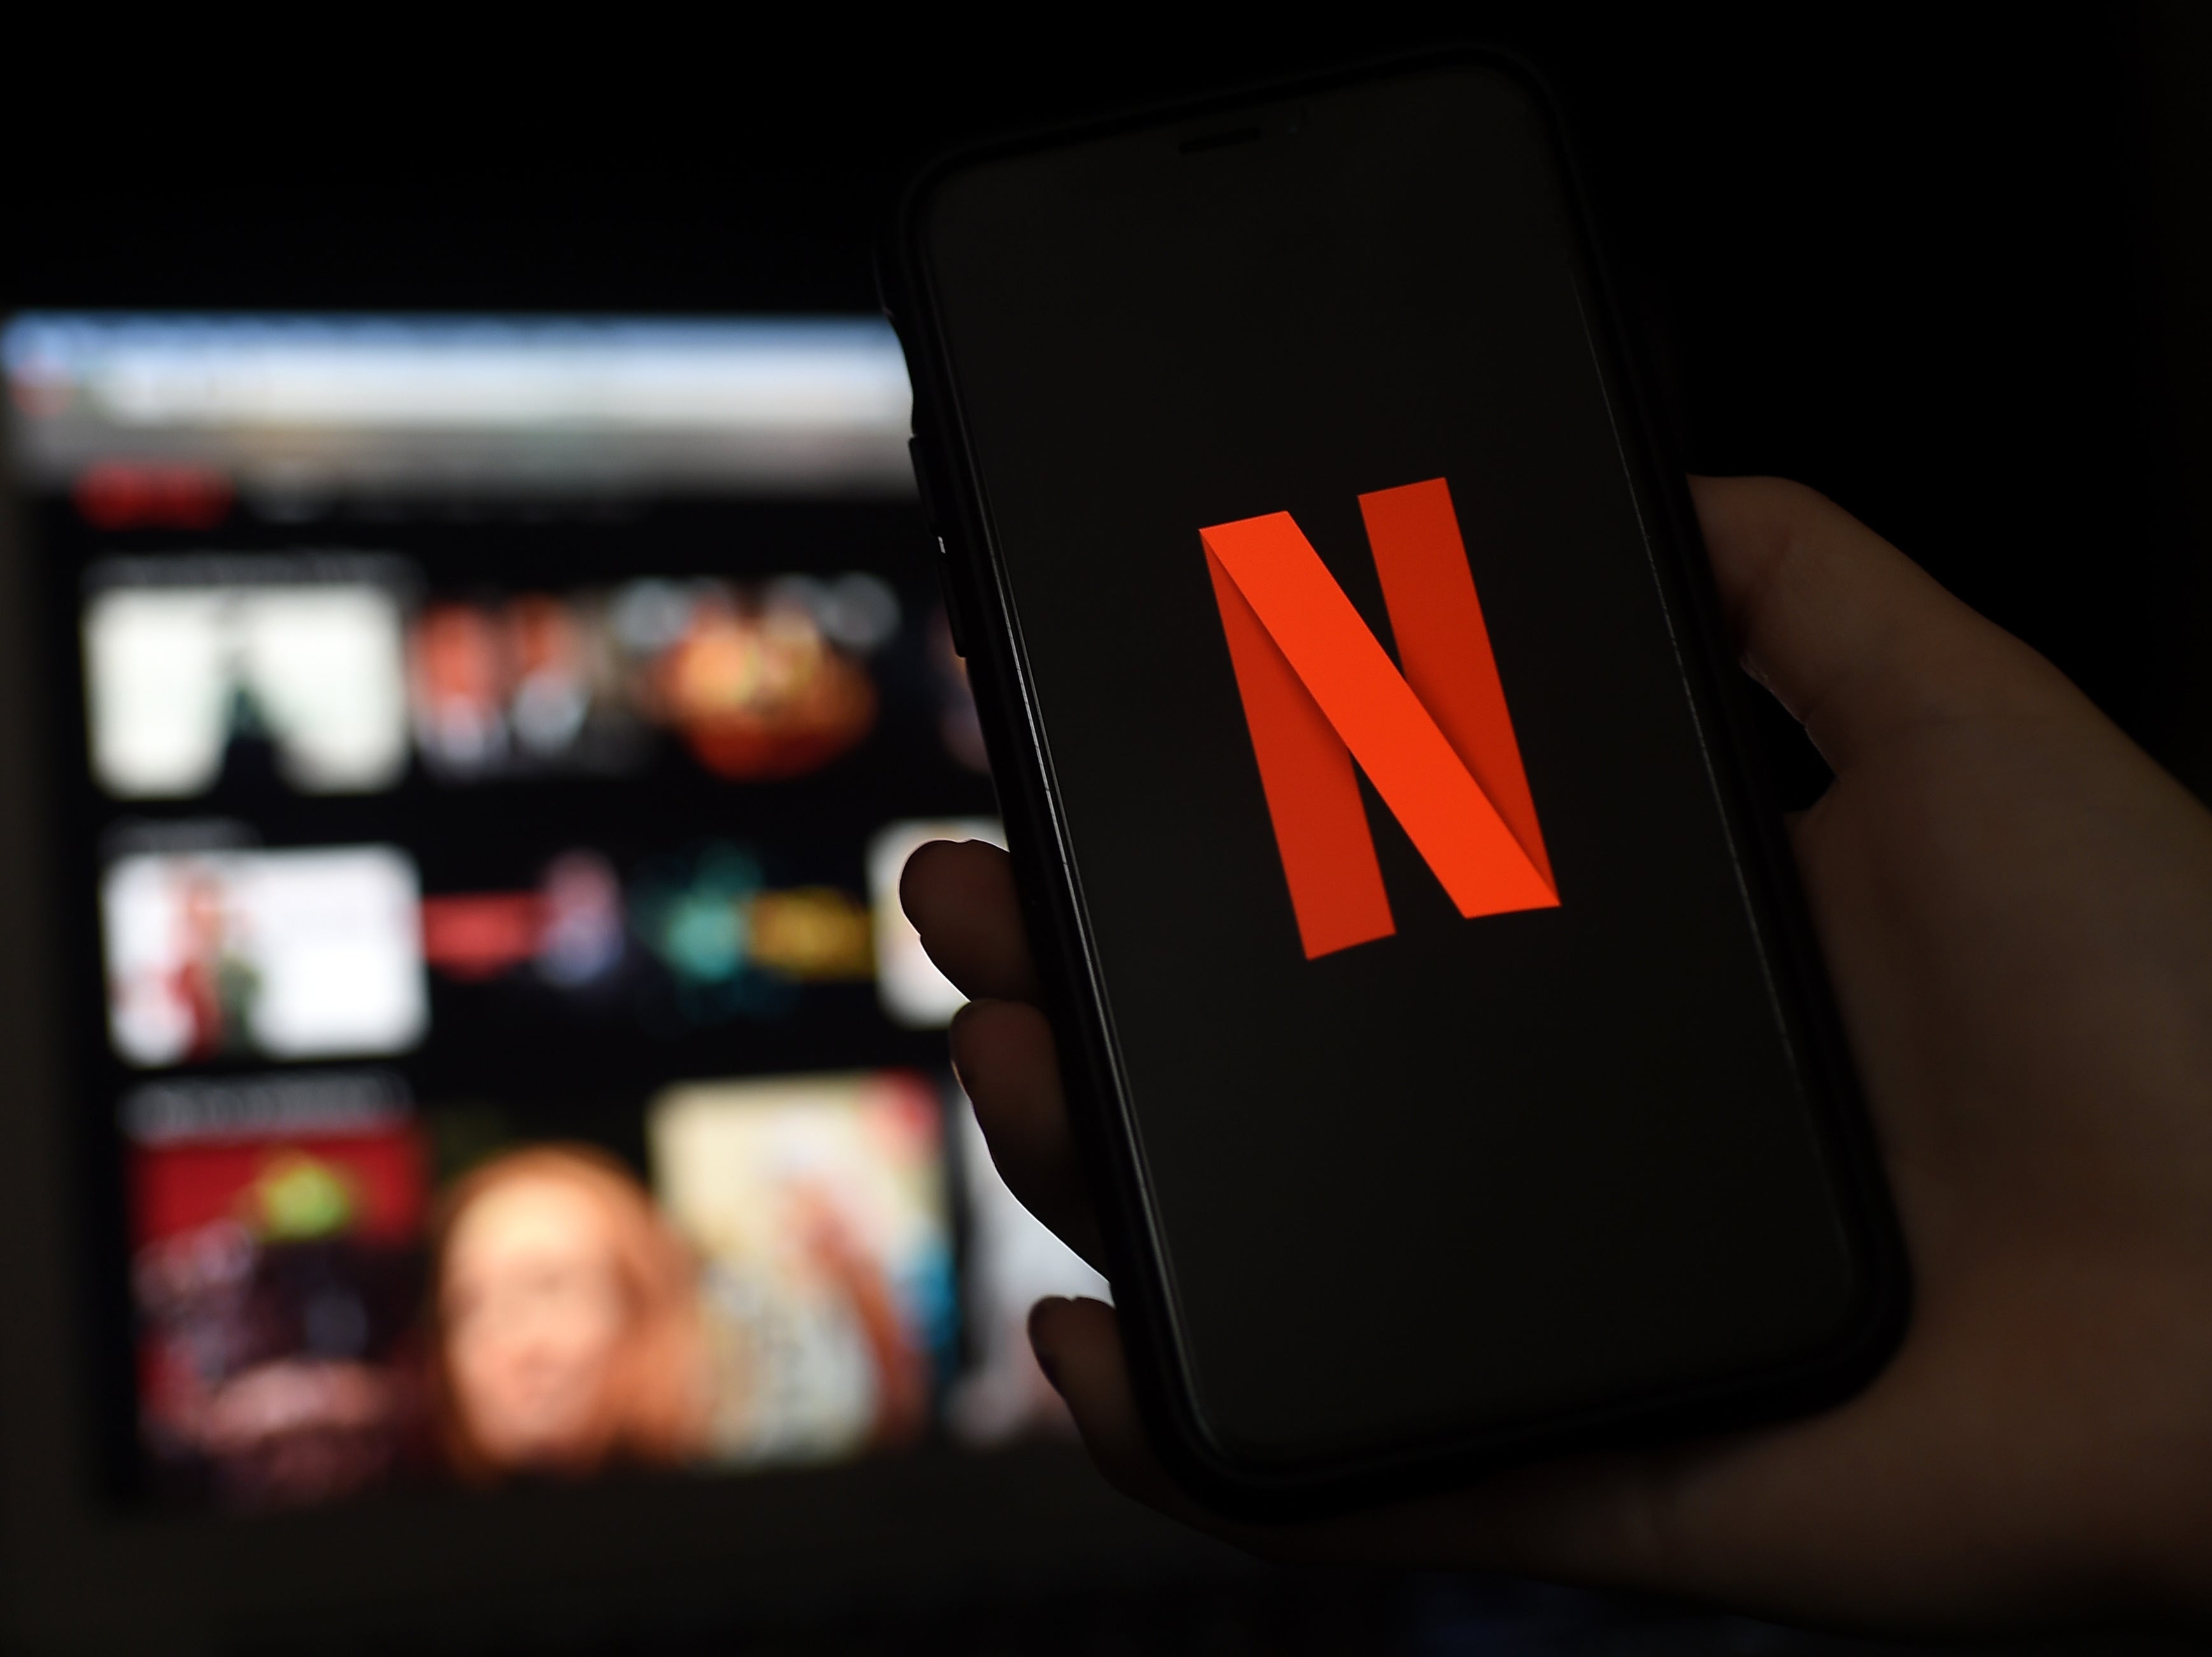 Netflix overpromised to the tune of 2 million subscribers